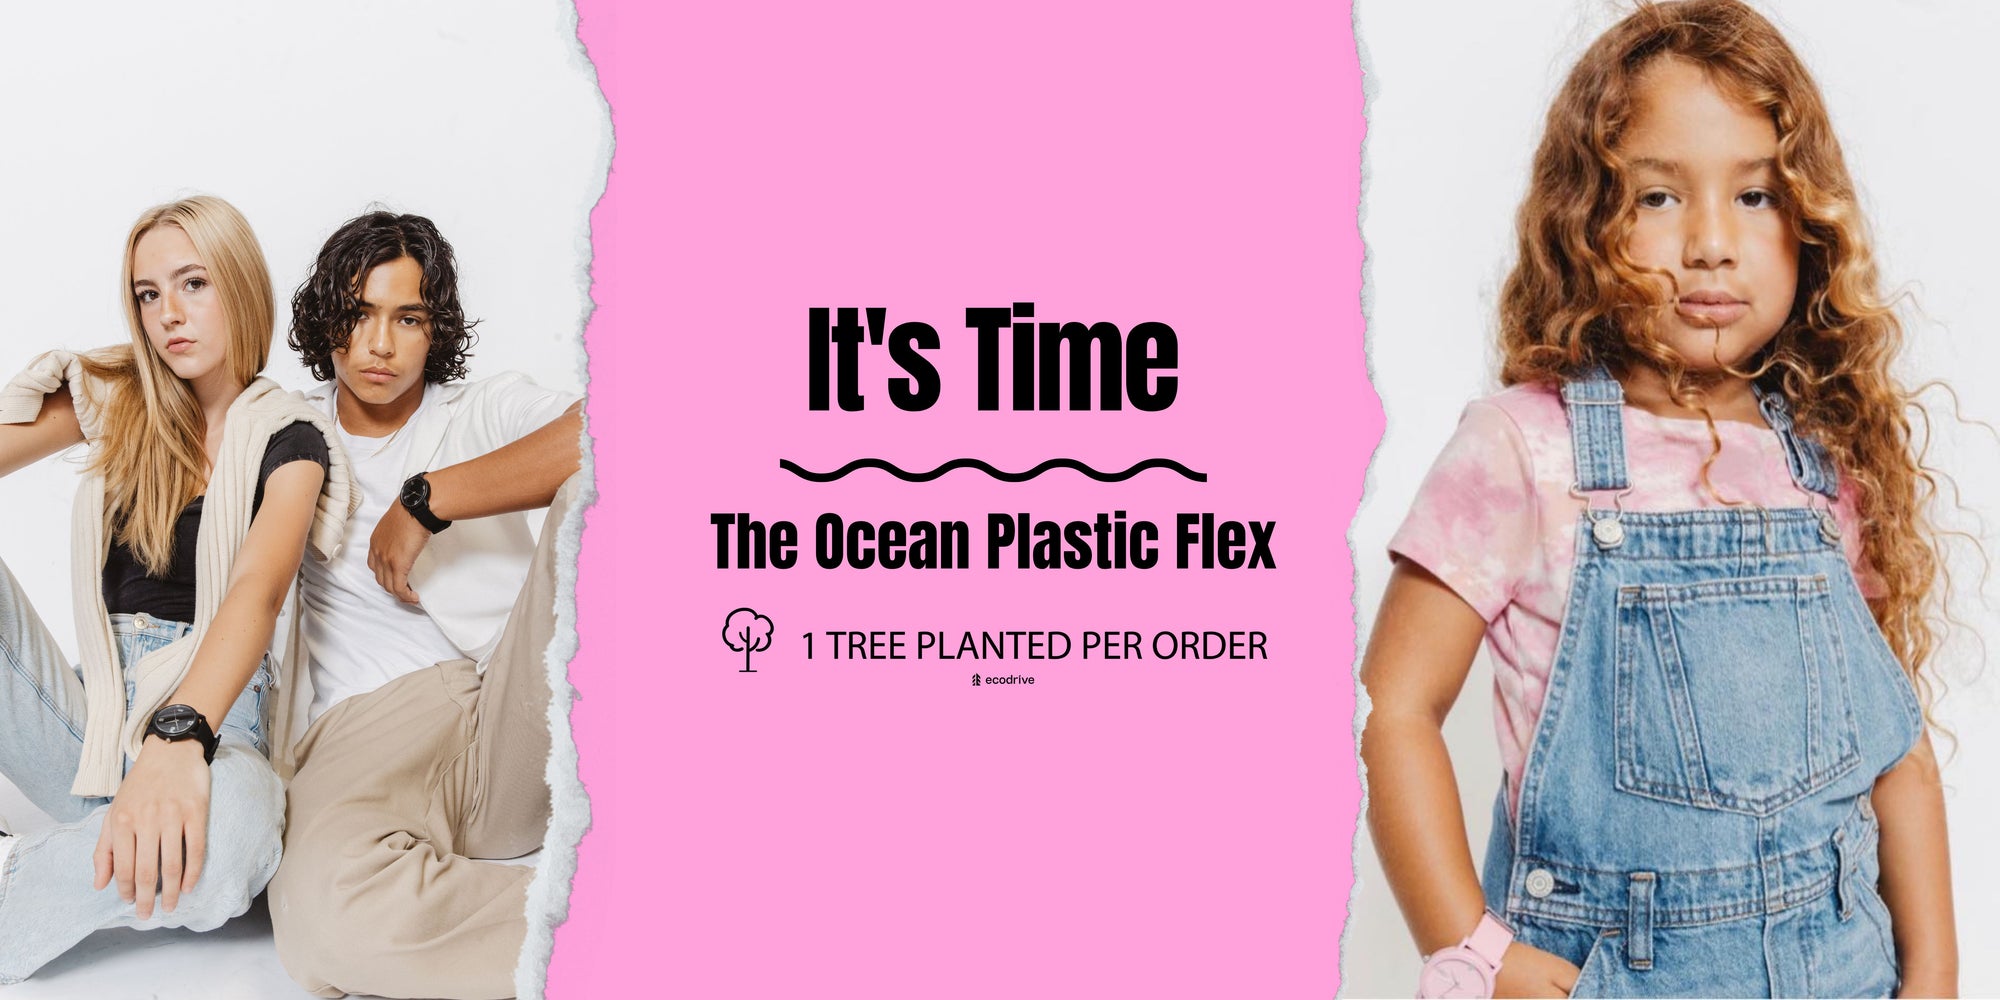 It's almost time to dive into sustainability with the launch of the Ocean Plastic Flex on September 5th!